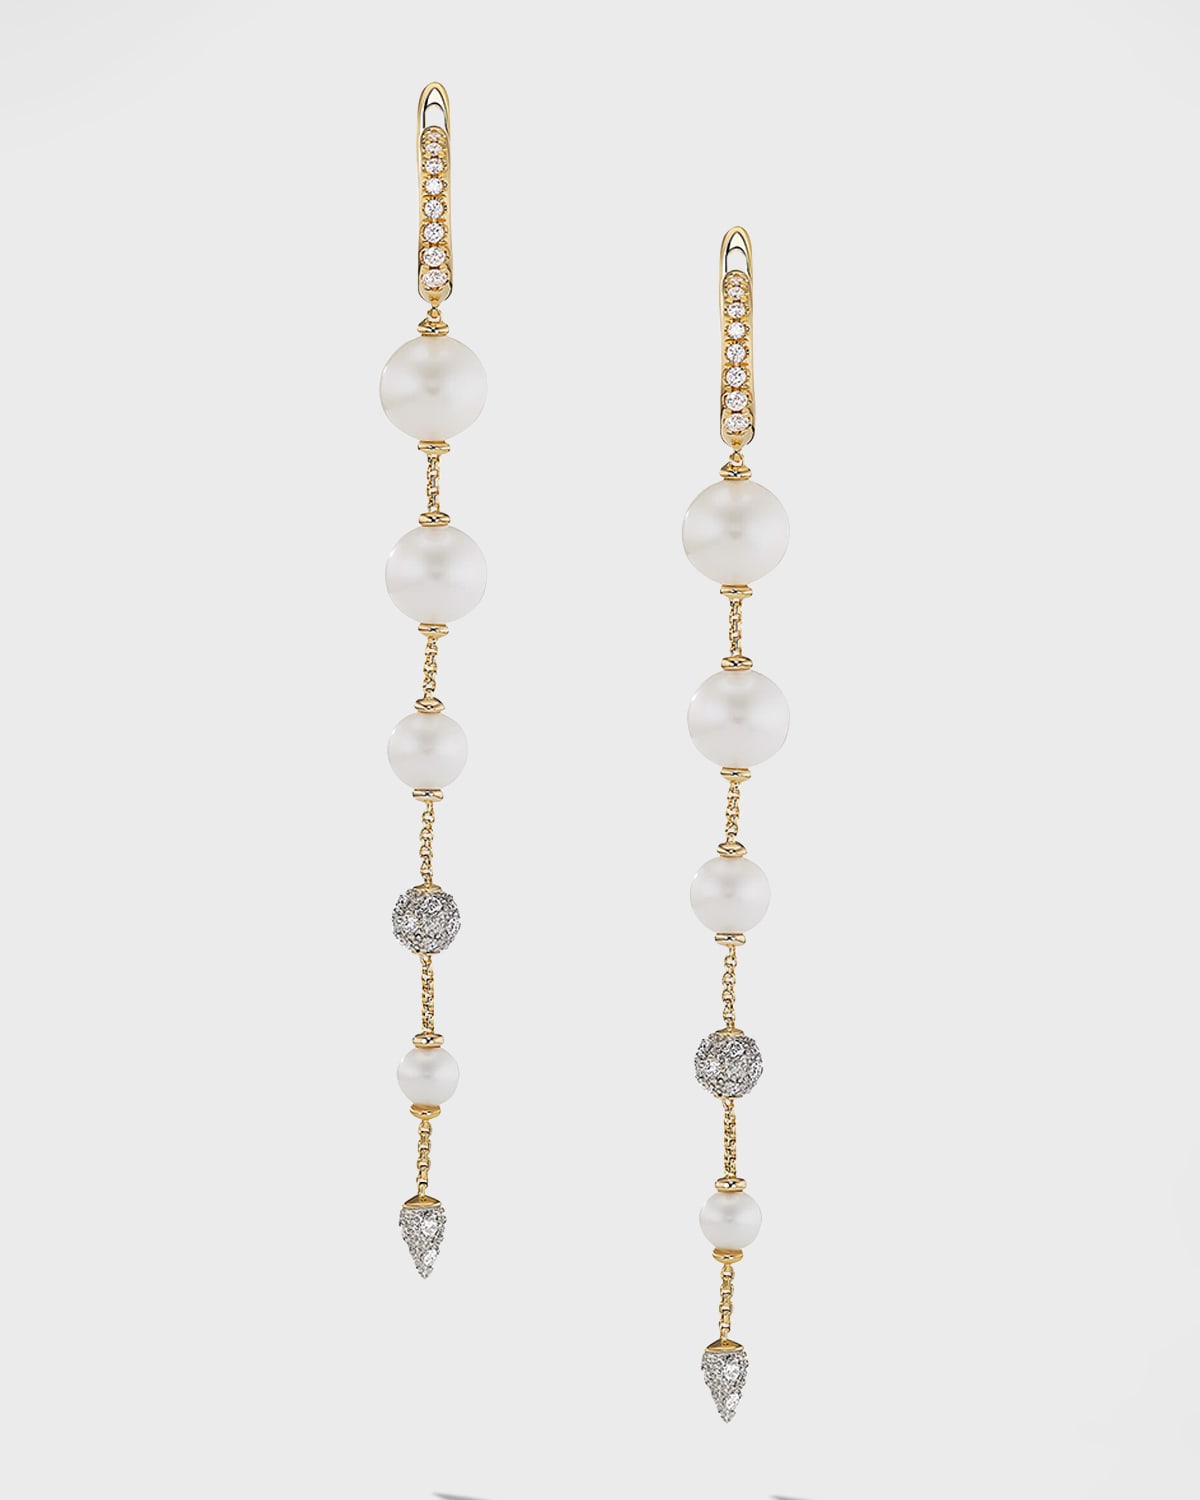 Shop David Yurman Pearl And Pave Drop Earrings With Diamonds In 18k Gold, 8mm, 3.1"l In 60 Multi-colored